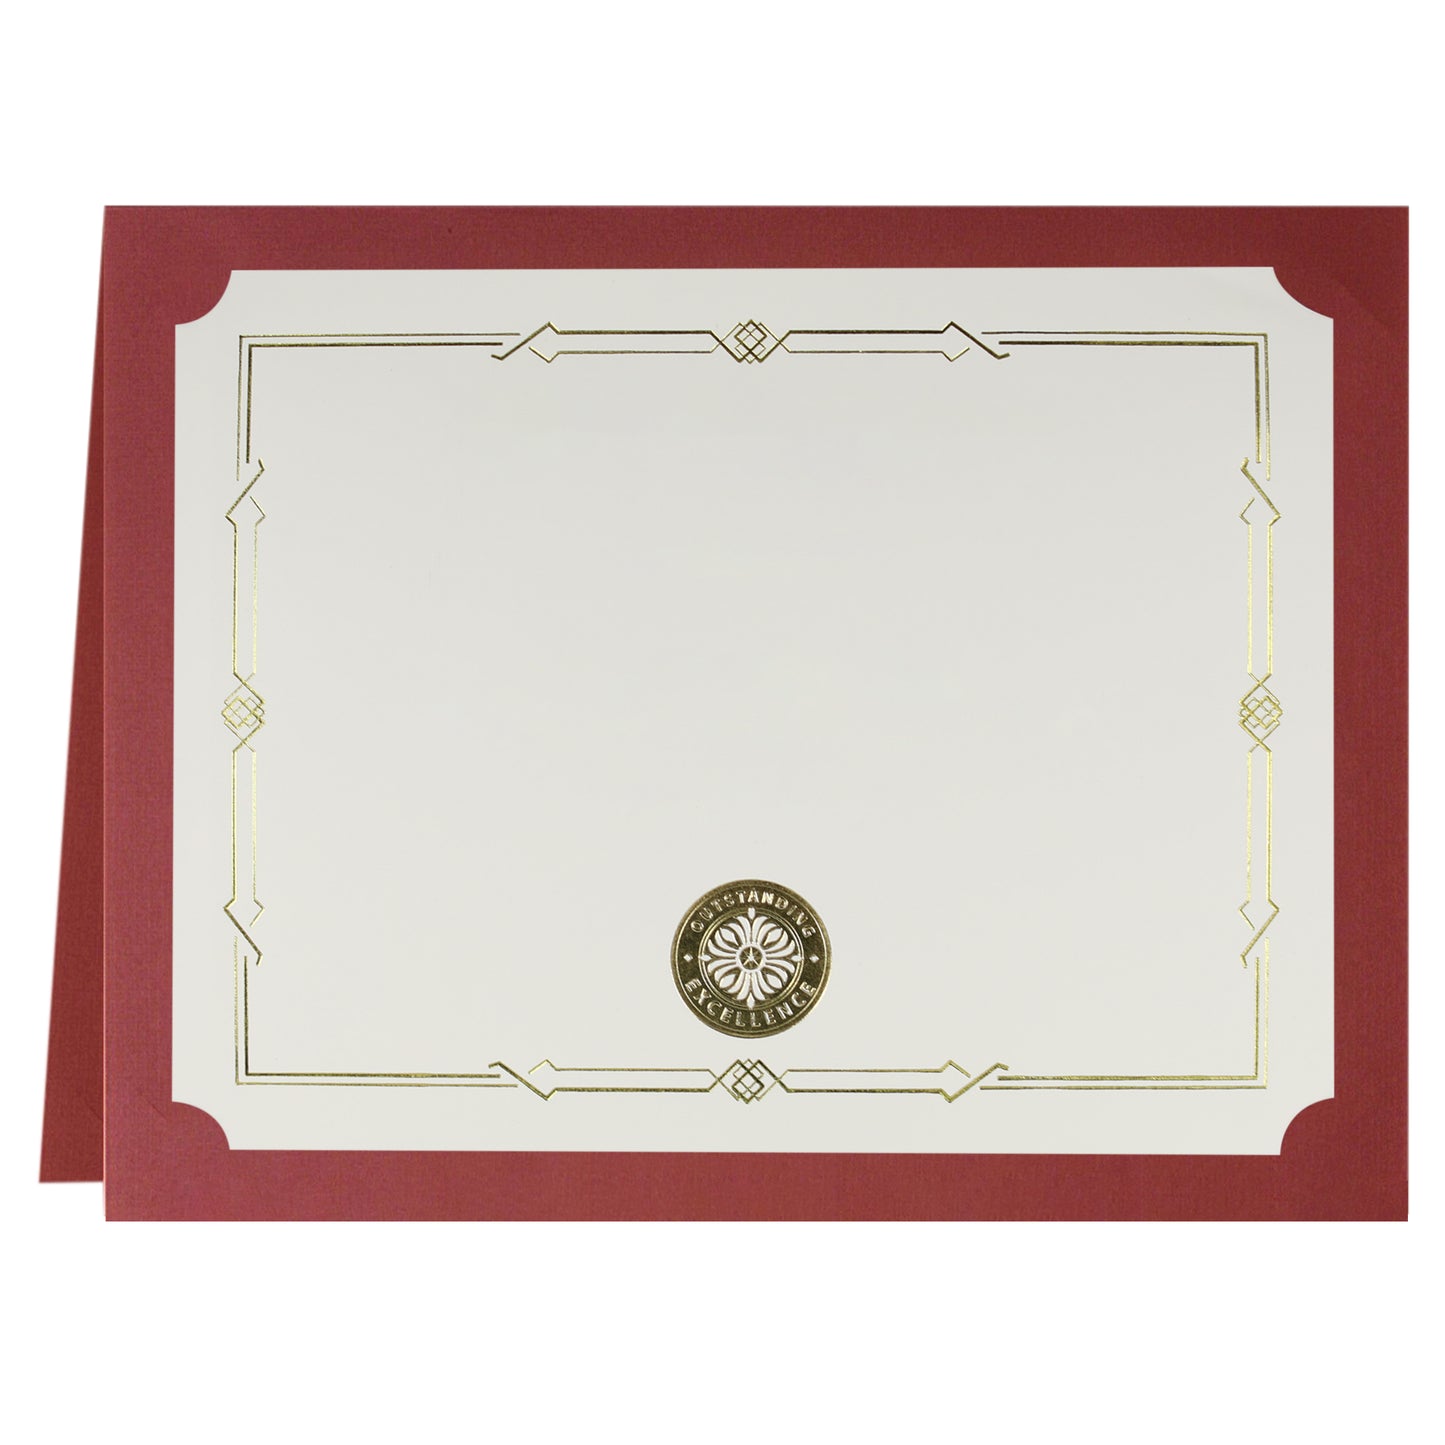 St. James® Certificate Holders/Document Covers/Diploma Holders, Red, Gold Foil Border, Linen Finish, Pack of 5, 83804